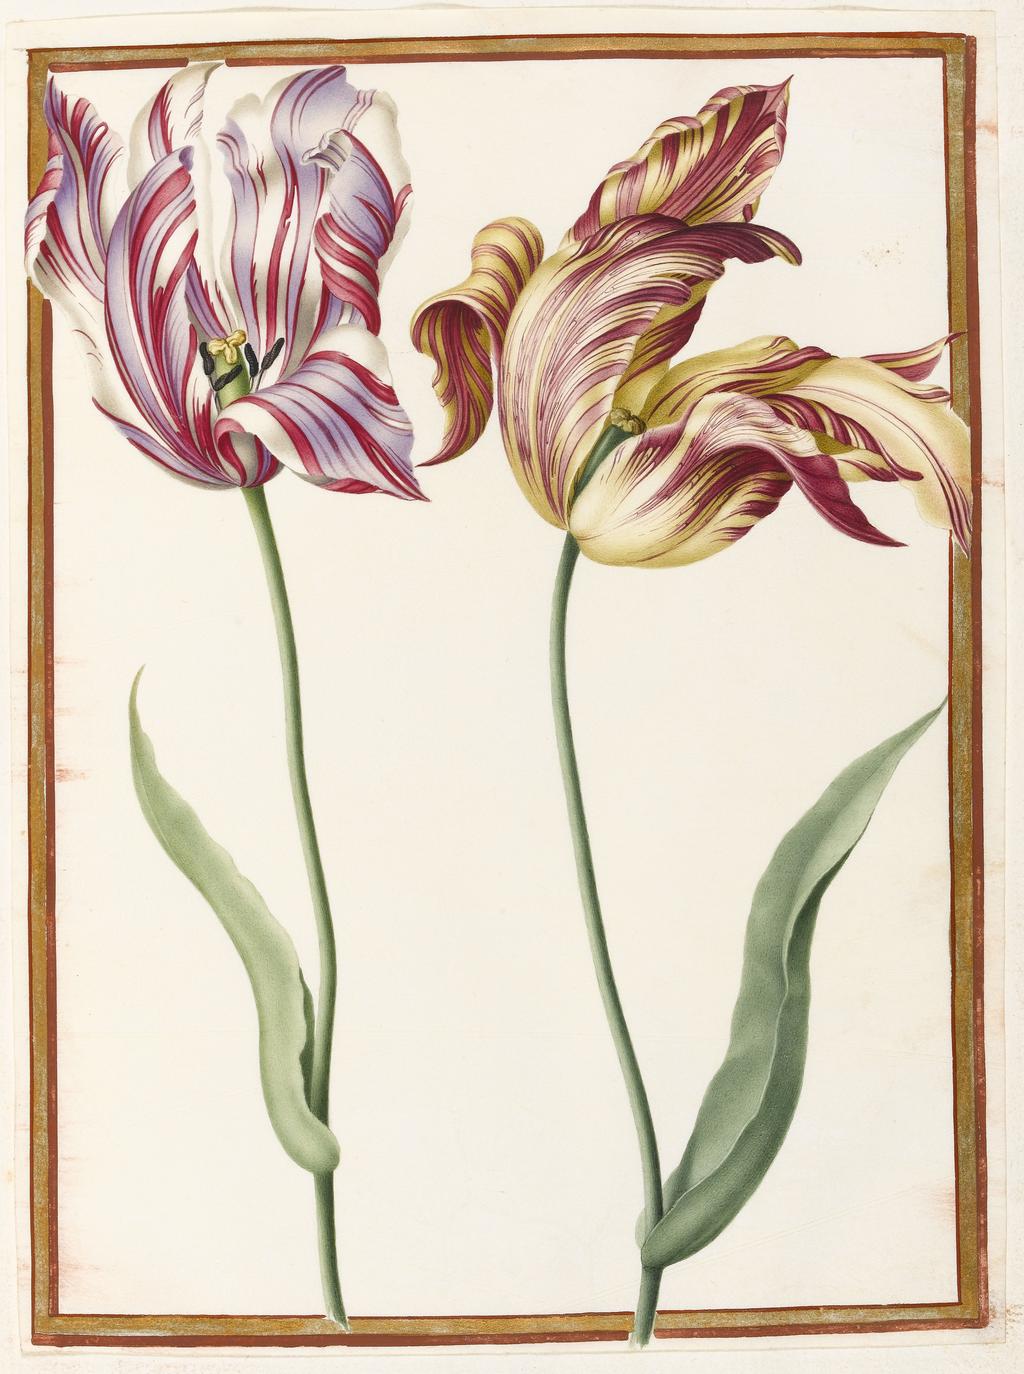 An image of Two 'broken' Tulips. Robert, Nicolas attributed to (French, 1614-1685). Watercolour and bodycolour on vellum, height 267 mm, width 198 mm. Album containing 62 botanical drawings on vellum tipped in on the gilt-edged pages of the album which bear the watermark of an 18th century French paper-maker, Malmenayde of Thiers (active from 1731). Bound in red morocco with clasps, the spine tooled in gilt. The Pages are interleaved with thin protective paper. Ruled lines of red and gold border the drawings on all sides. 17th Century. French.